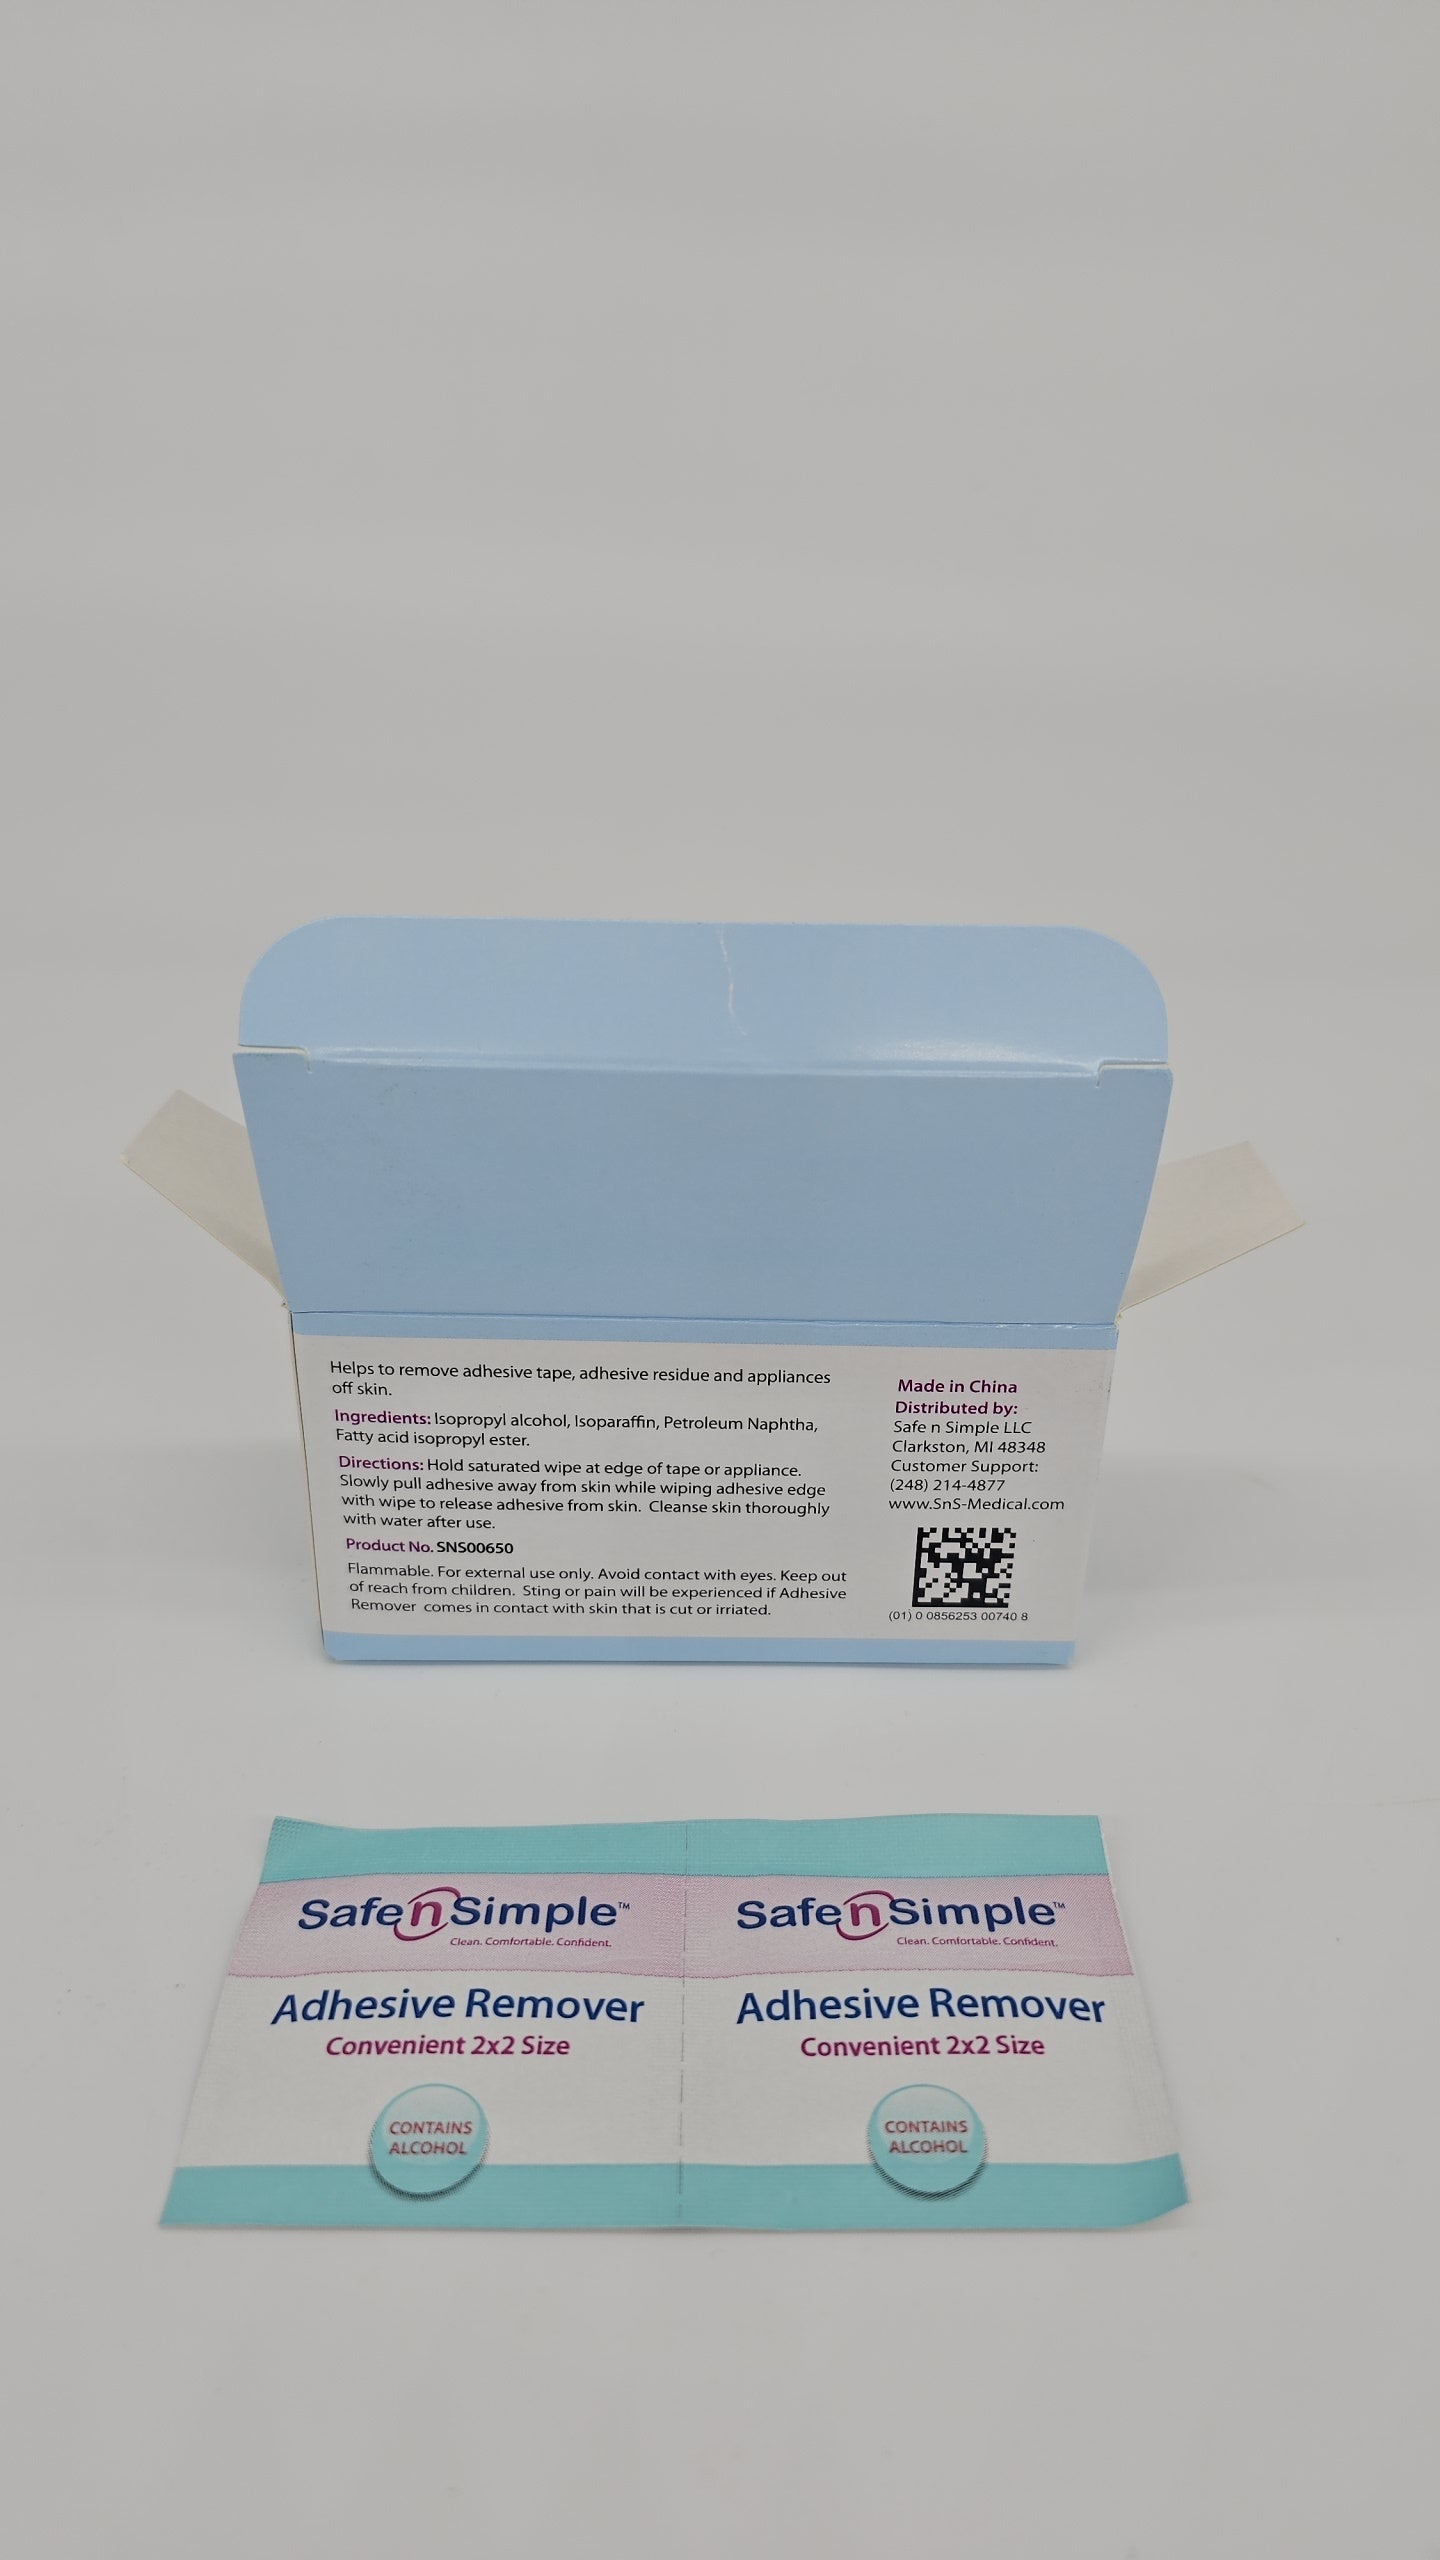 Safe N Simple Alcohol Based Adhesive Remover Wipes